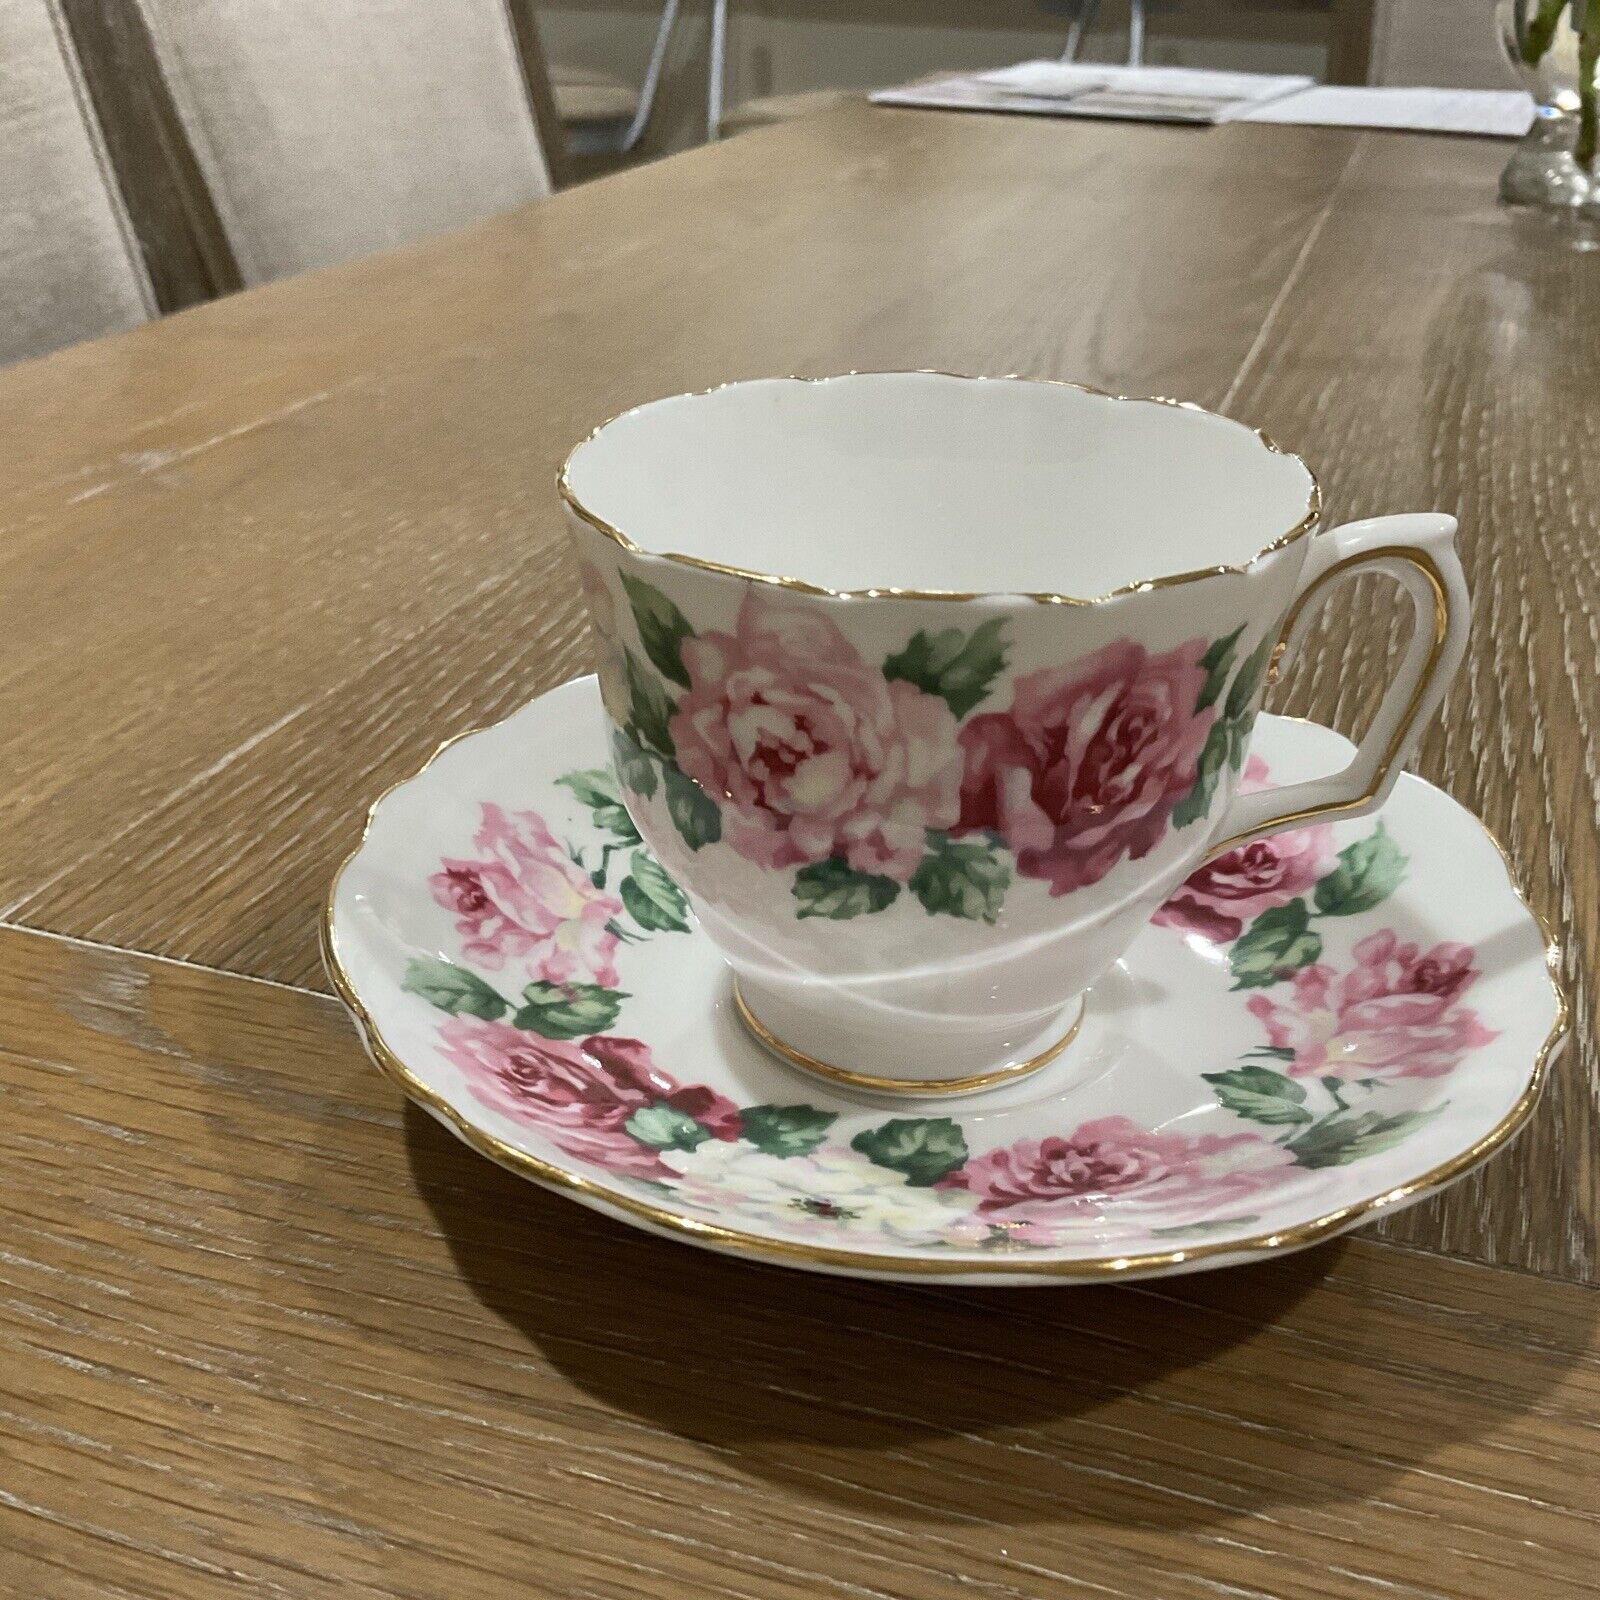 Crown Staffordshire England, Bone China, Roses, Tea Cup & Saucer